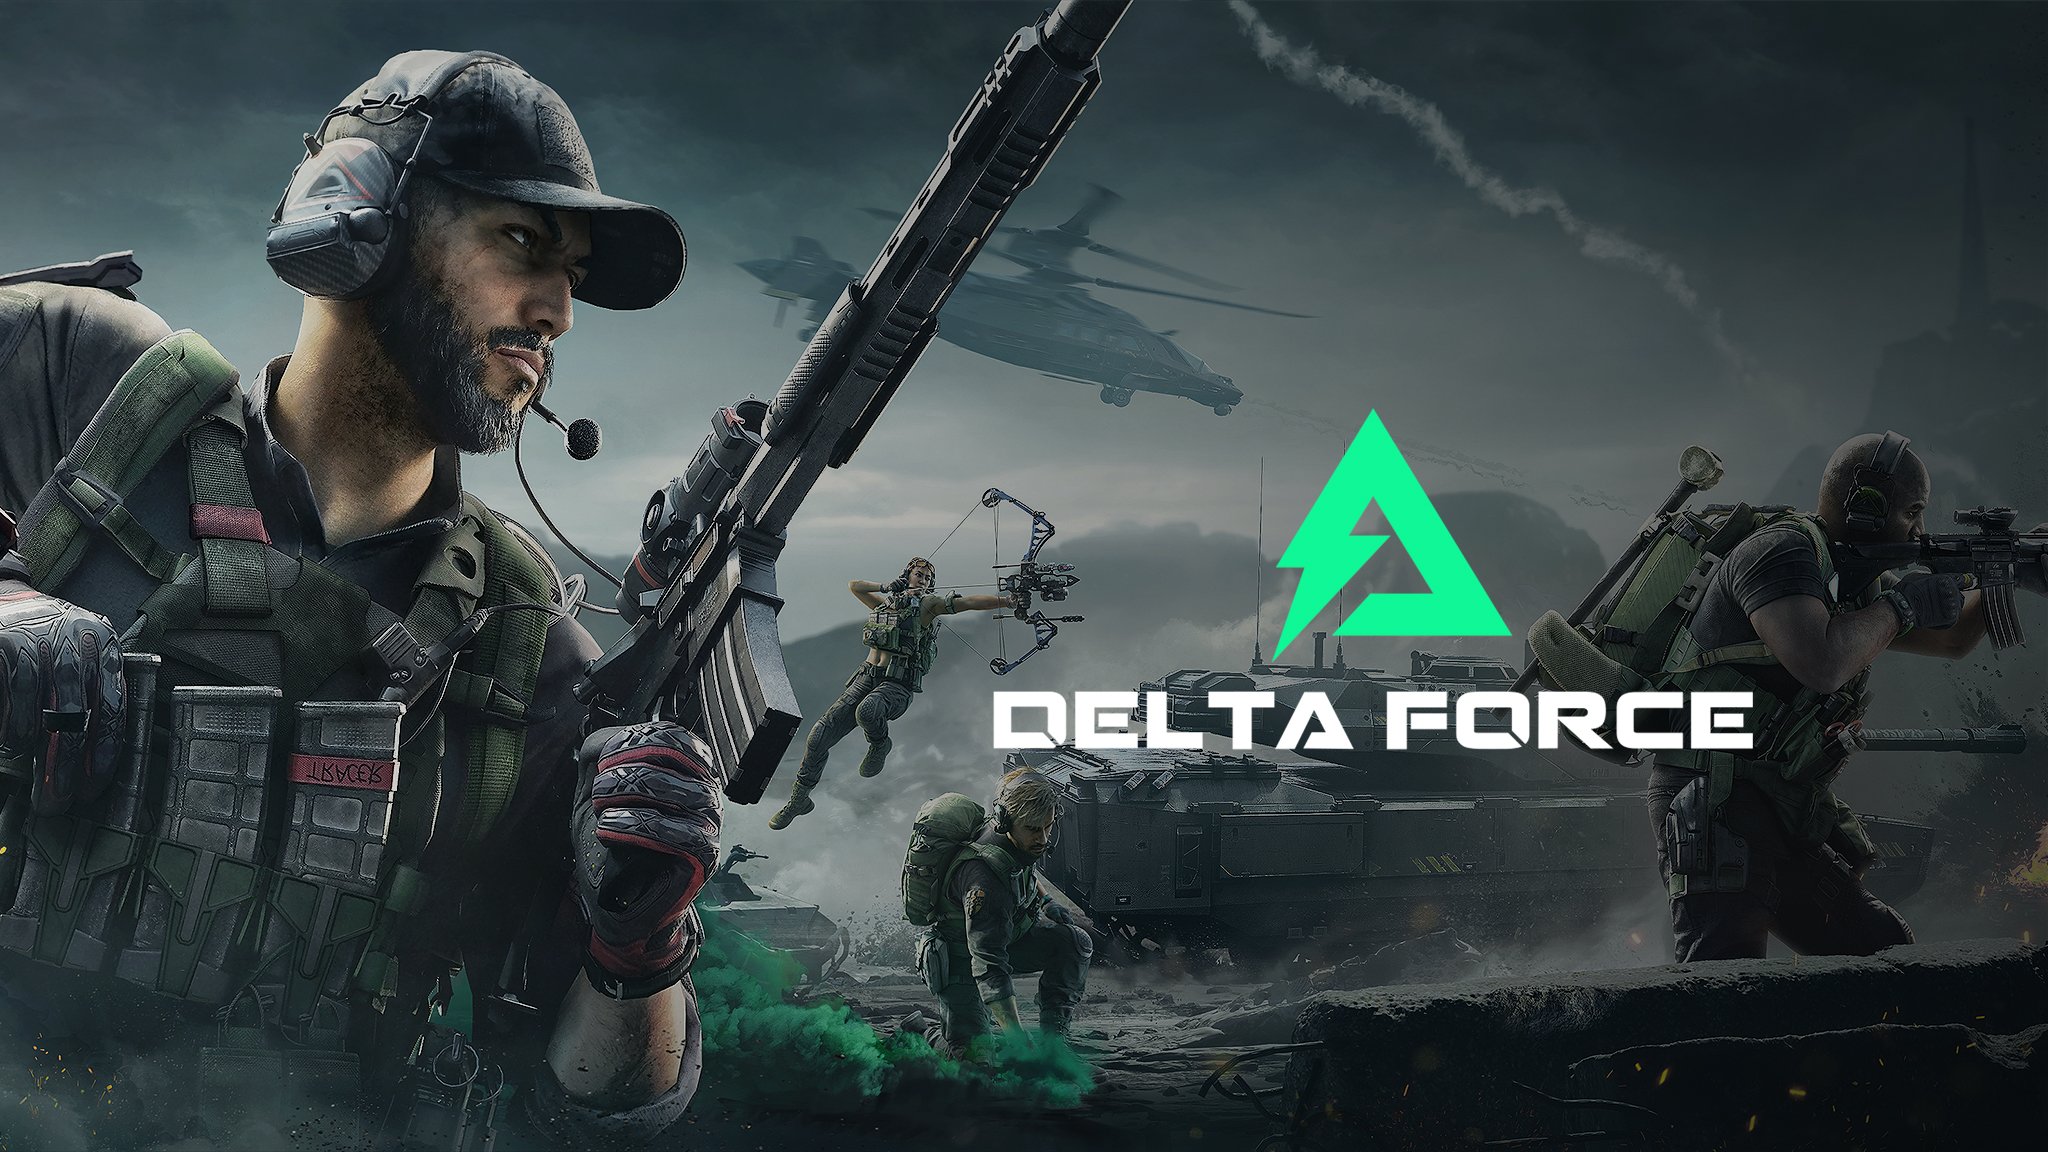 The full announcement of Delta Force: Hawk Ops. The game will be available on Xbox, PlayStation, PC, and mobile devices